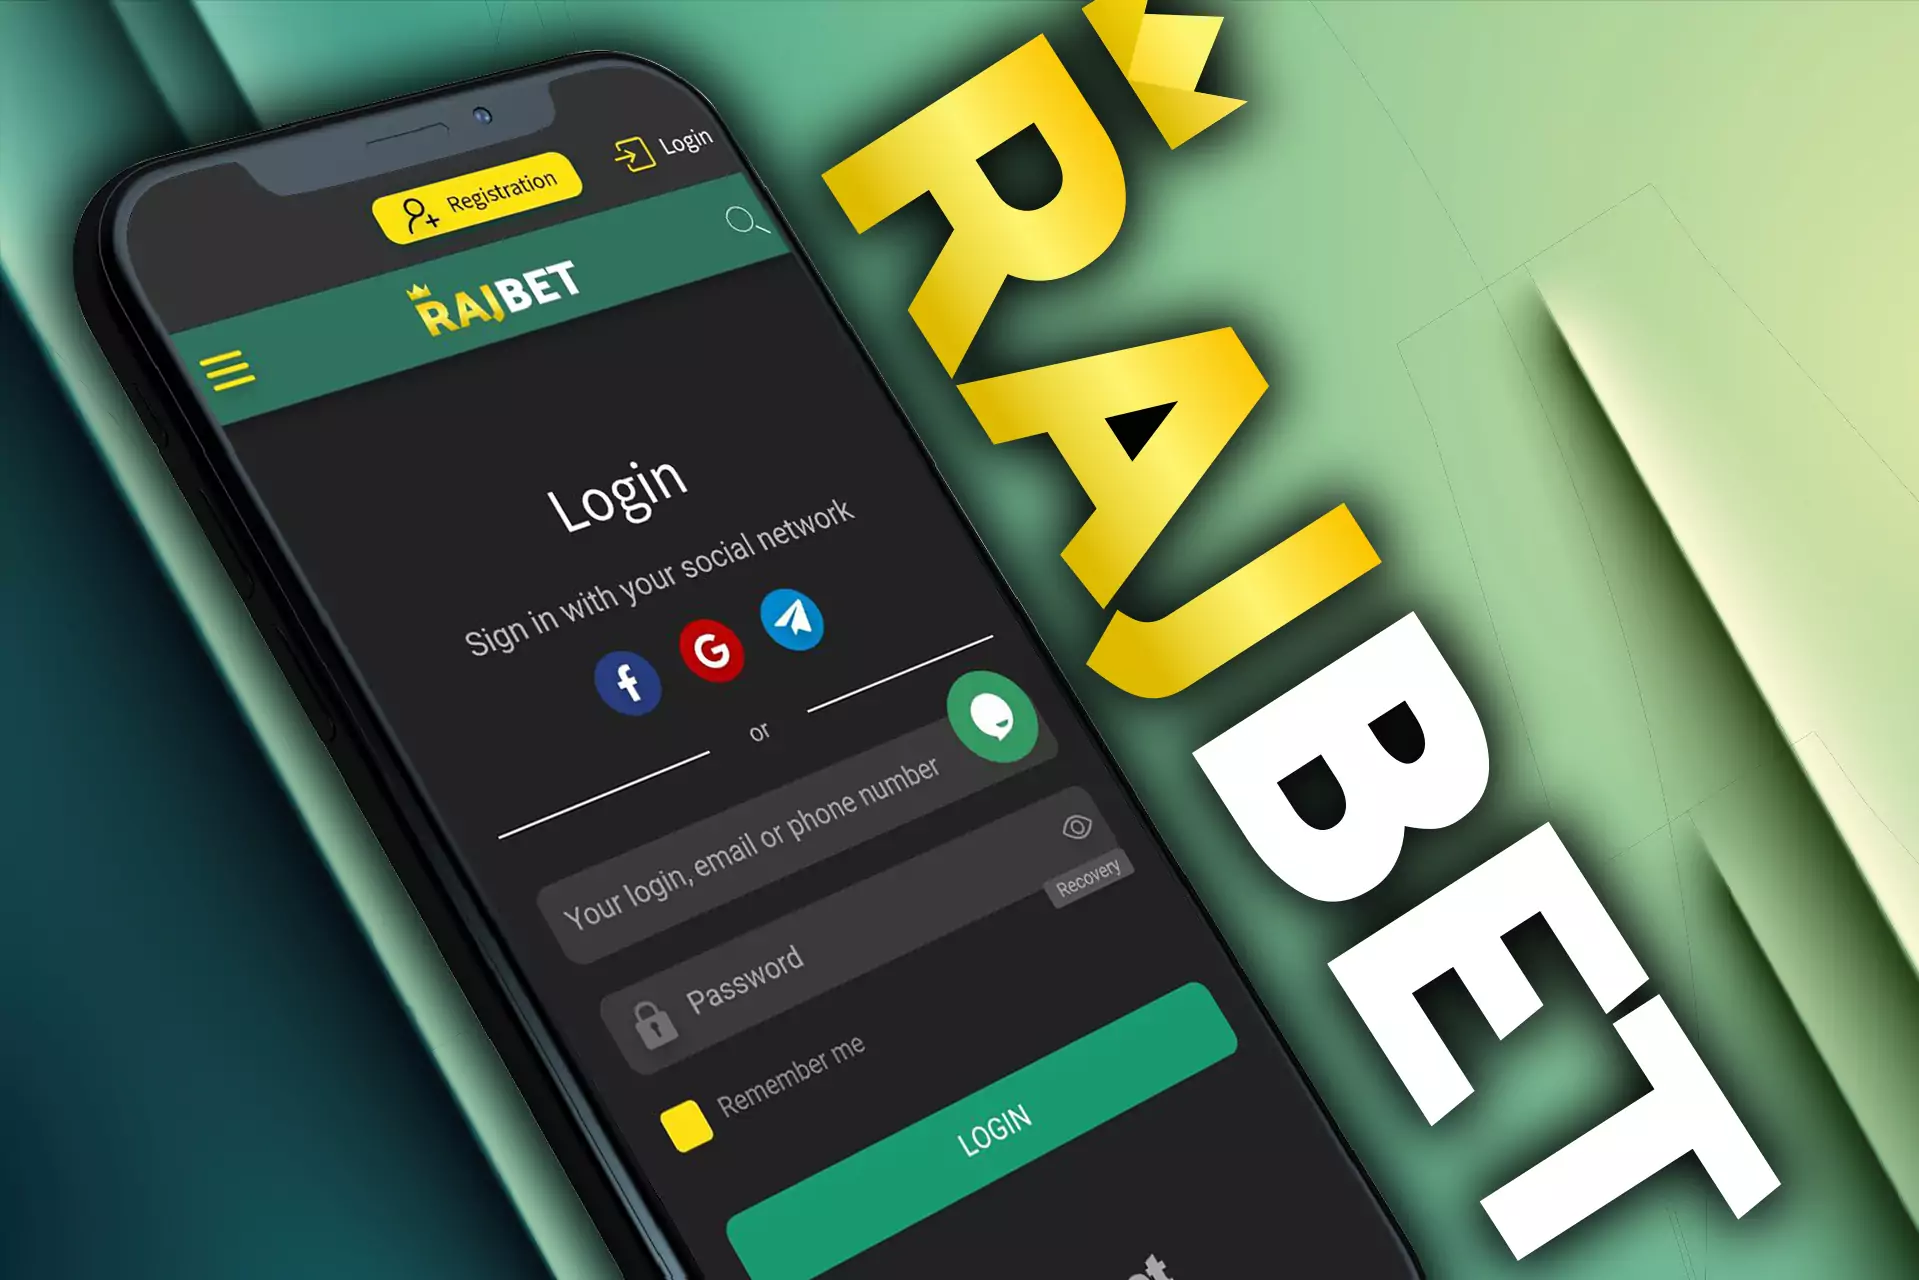 The Rajbet app supports logging into your personal account.